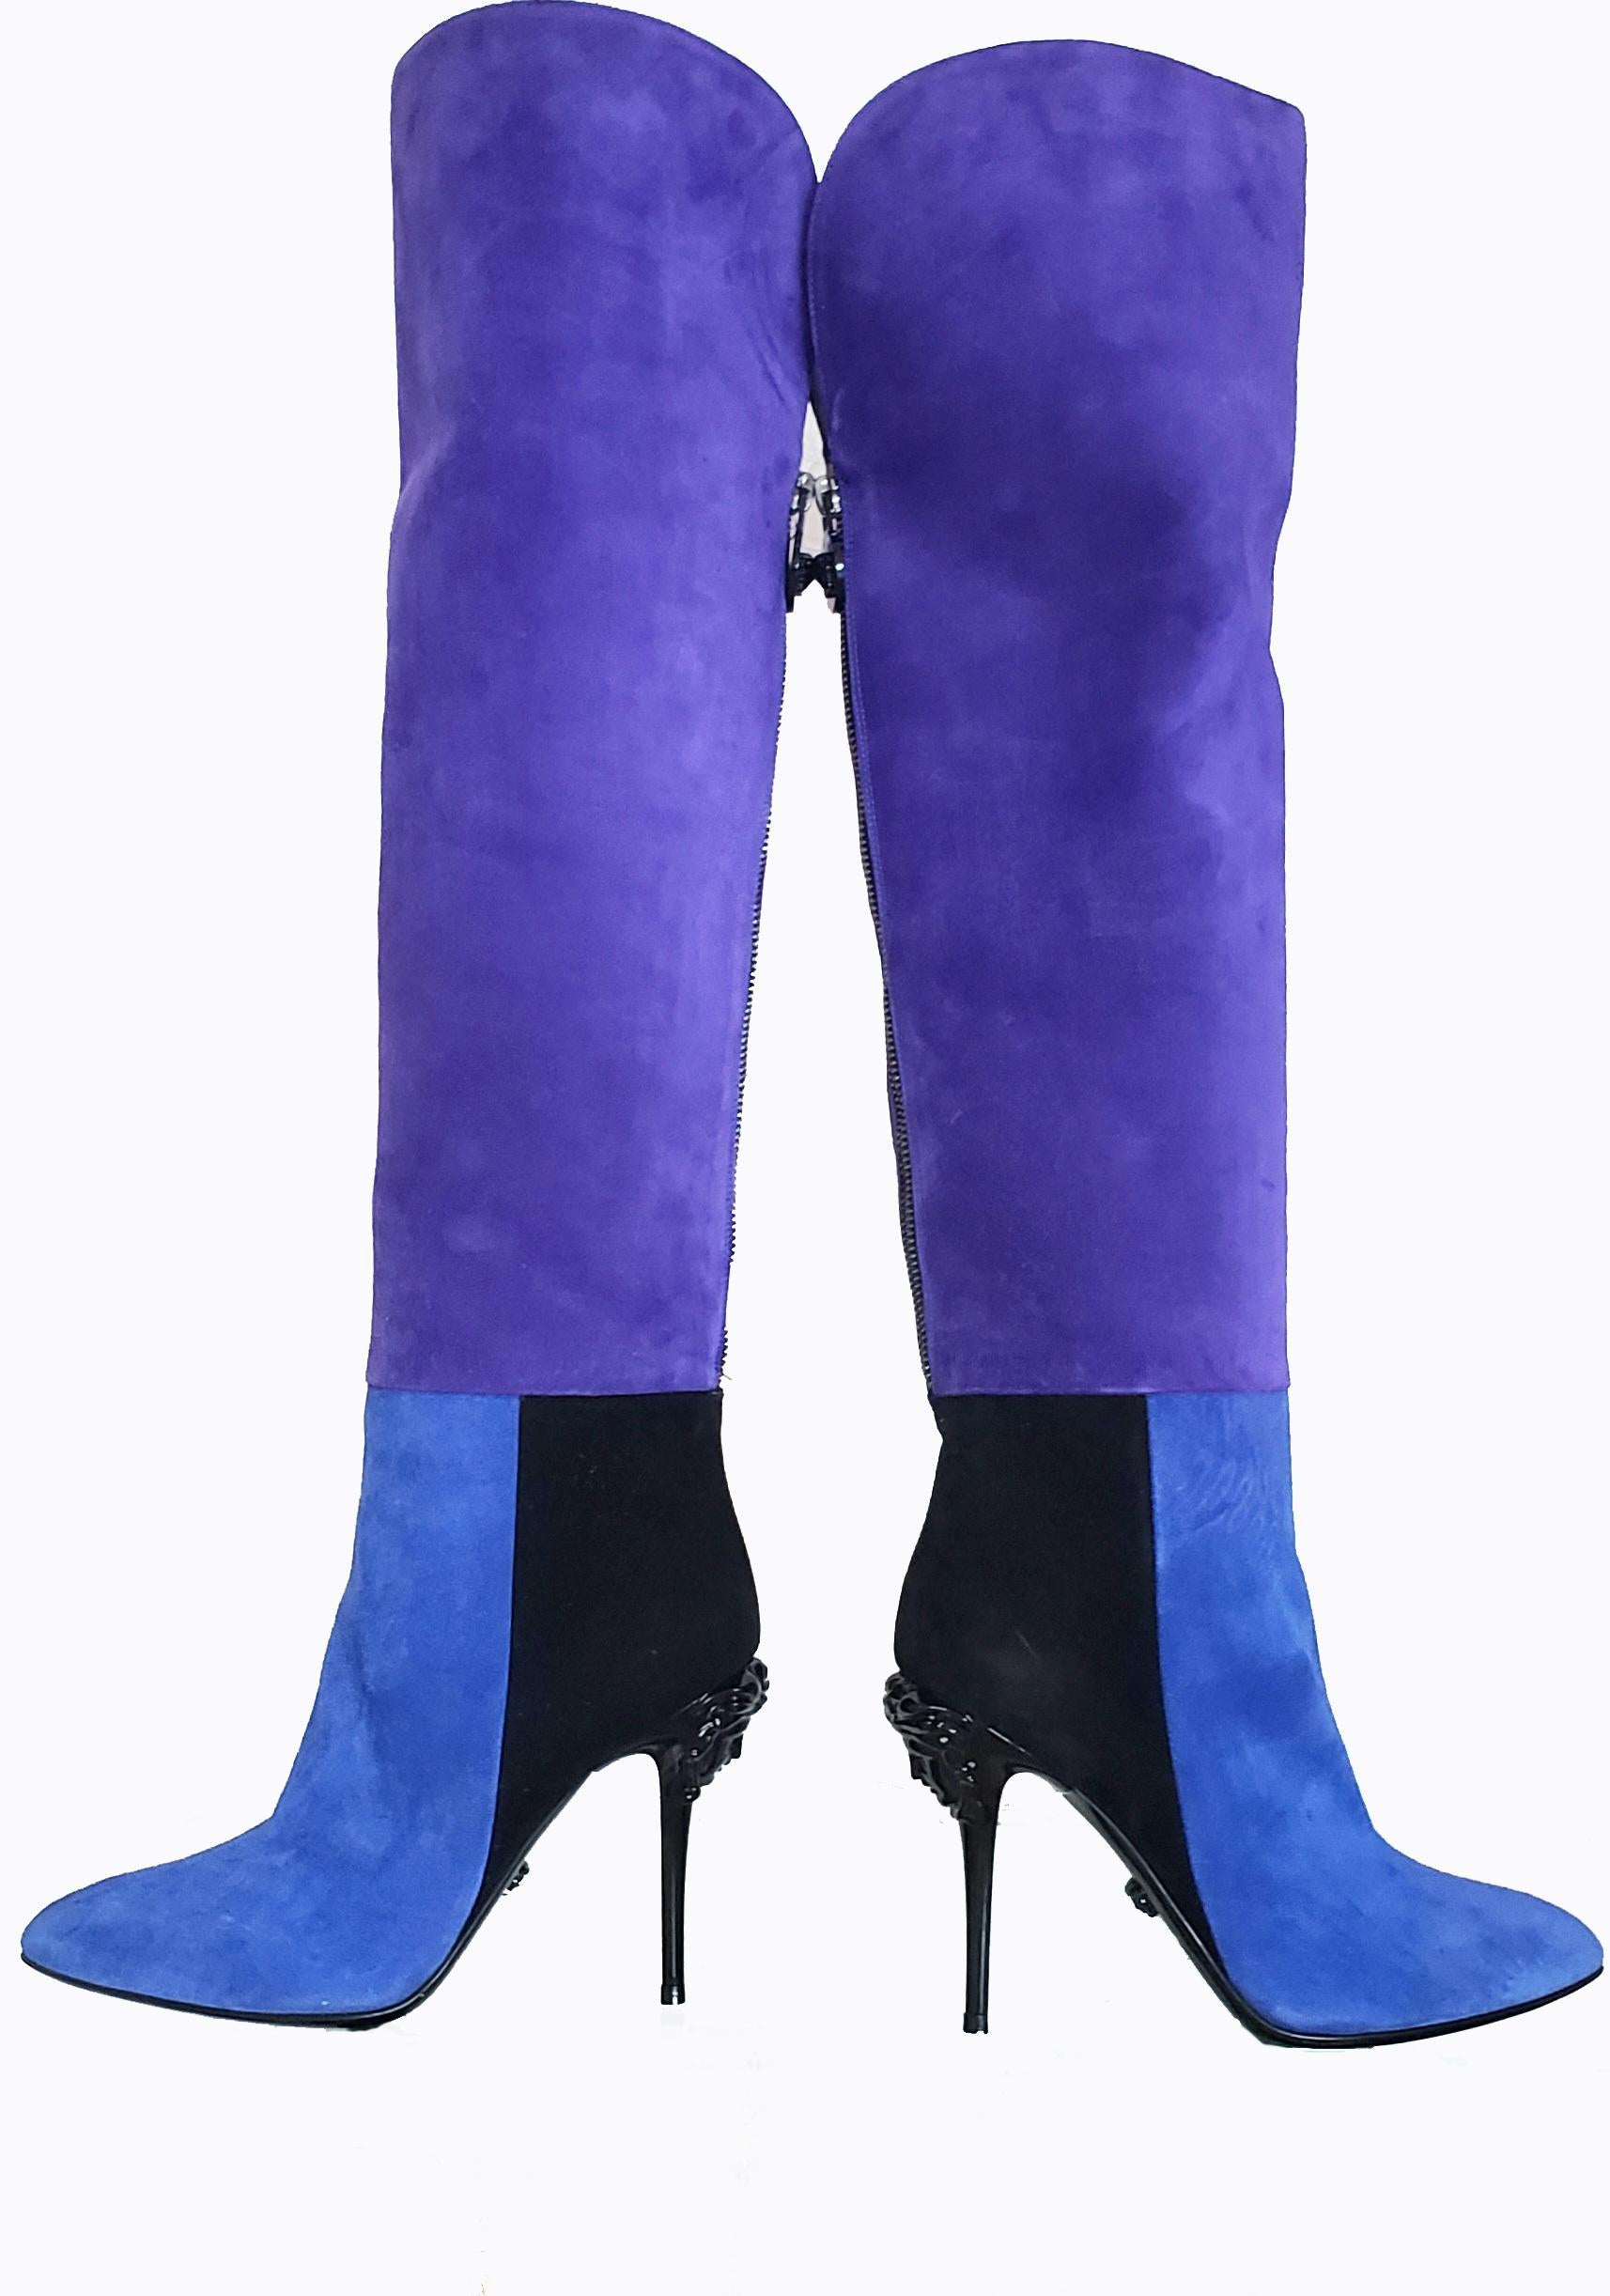 New VERSACE COLOR BLOCK BLUE SUEDE PALAZZO BOOTS 37 - 7 In New Condition For Sale In Montgomery, TX